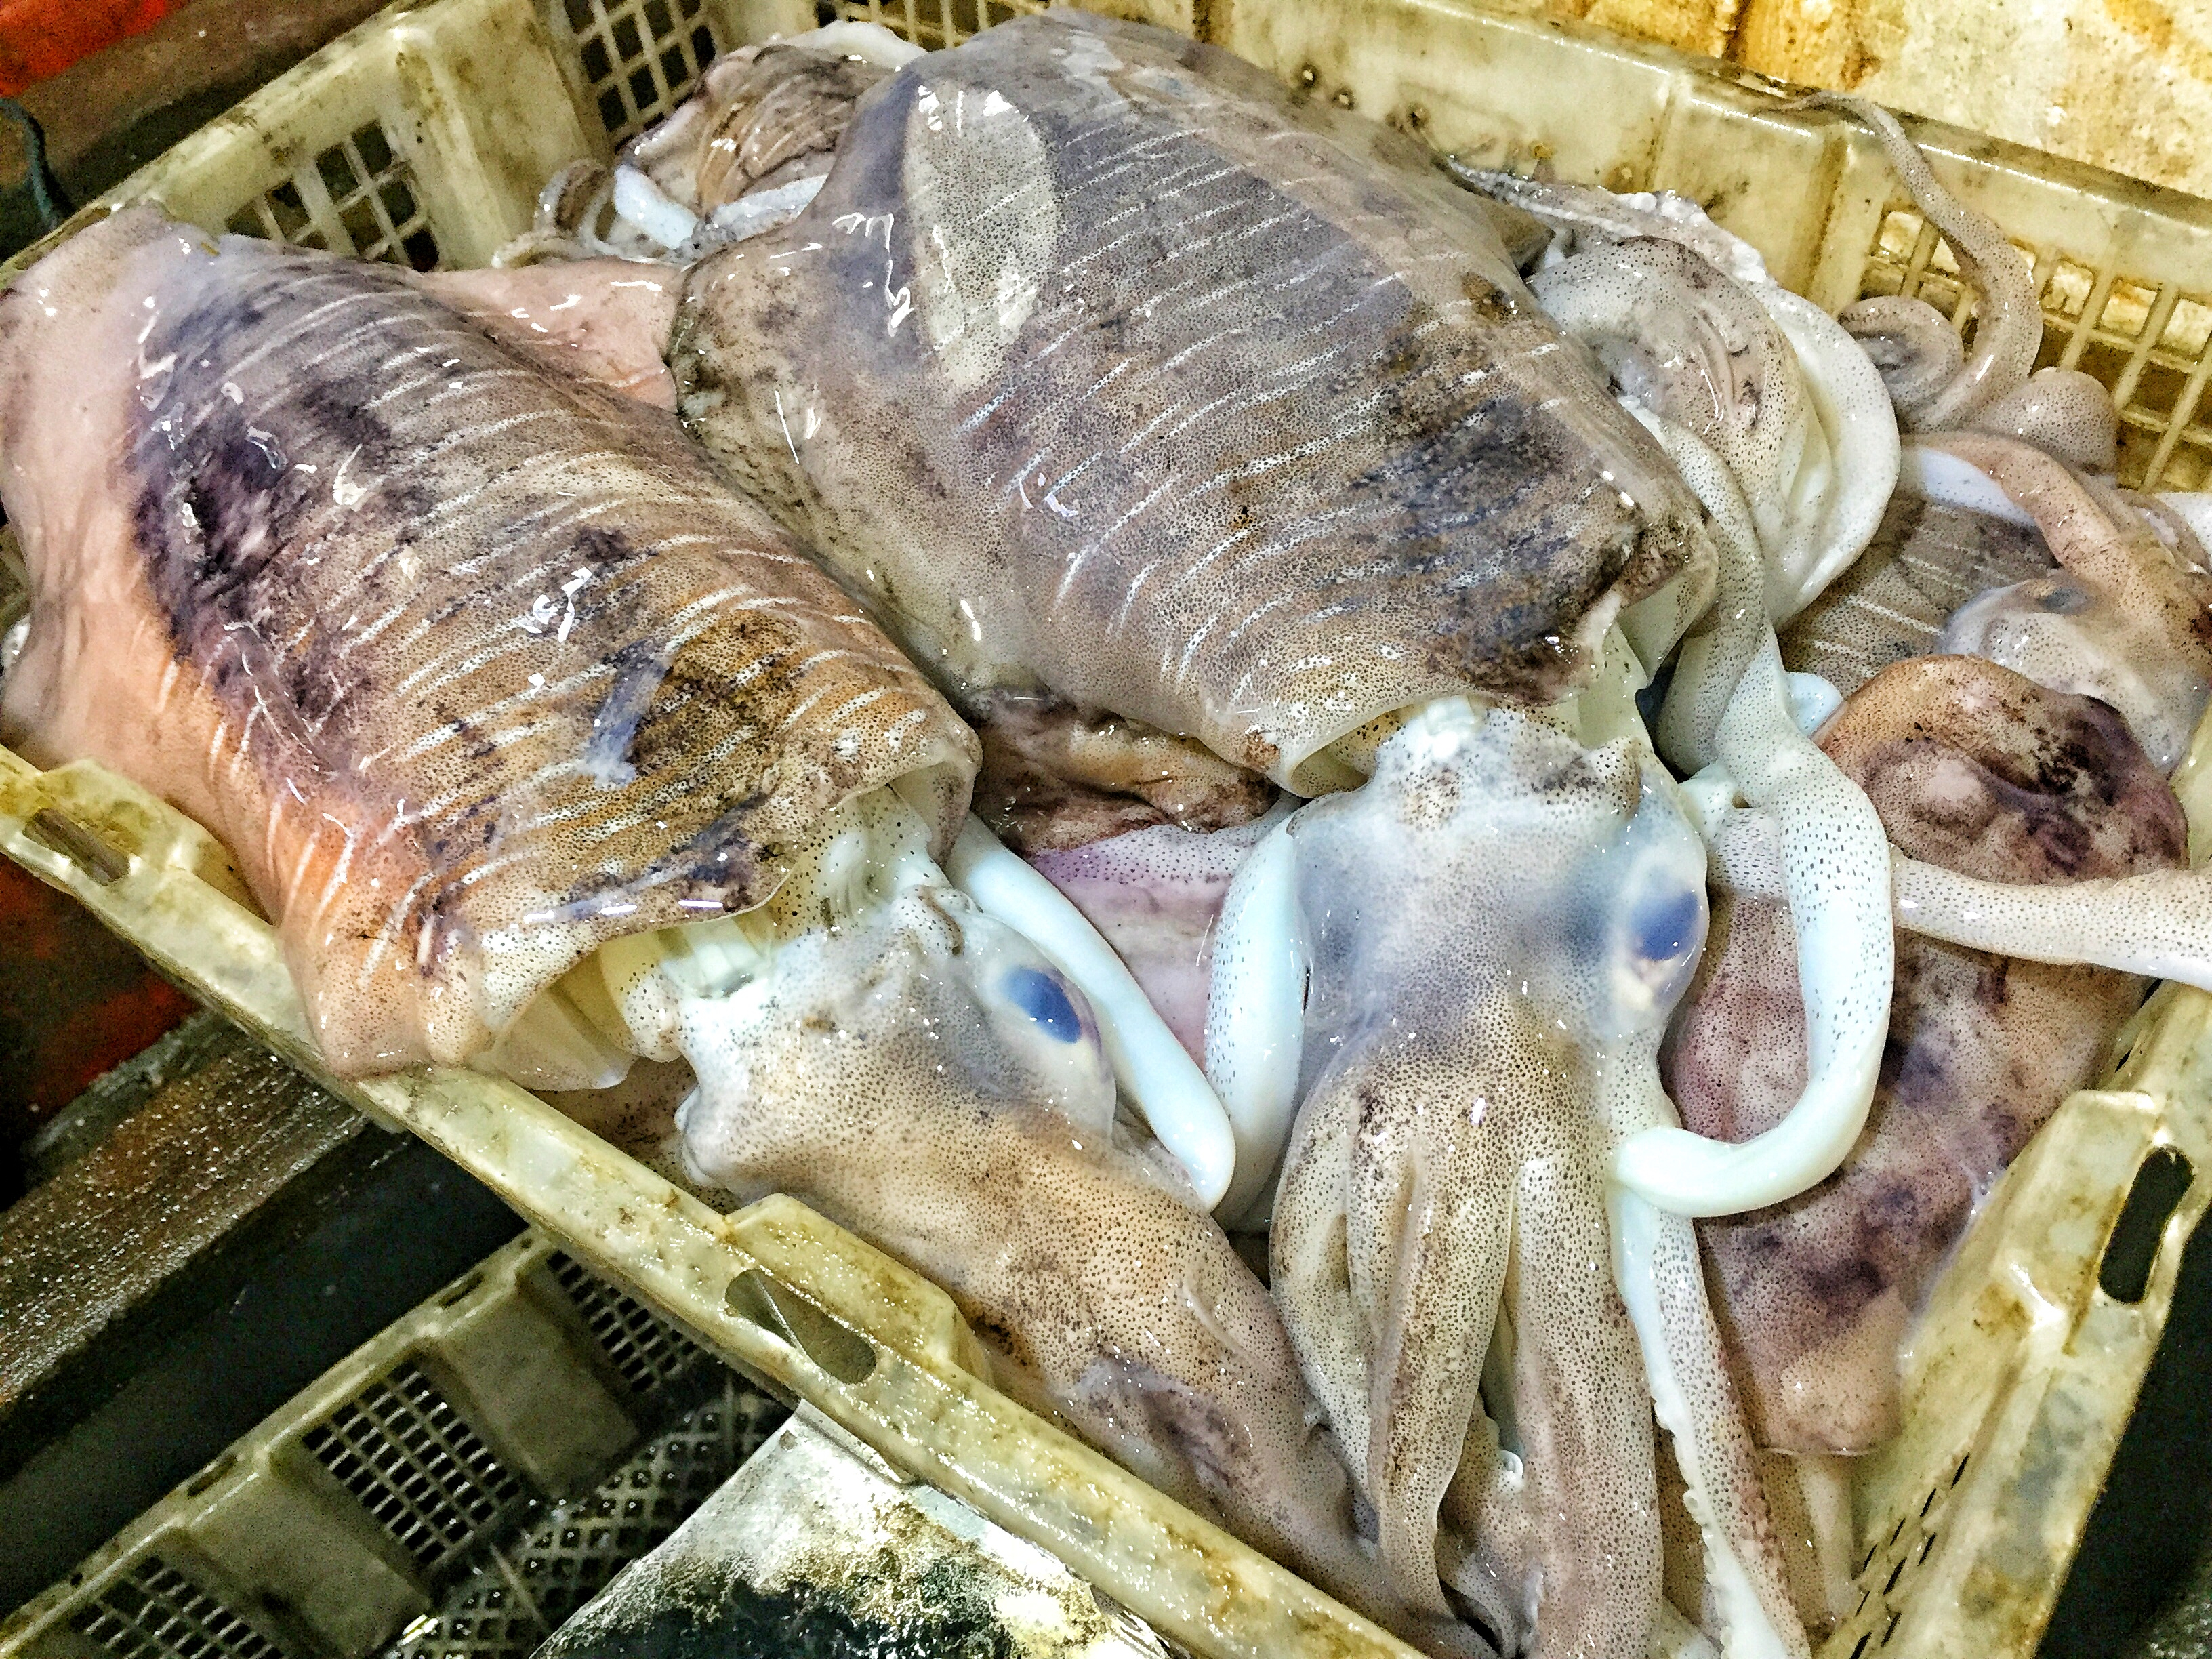 COOKING CLASS AND MARKET SHOPPING WITH THE CHEF FROM THE RITZ-CARLTON BALI squid